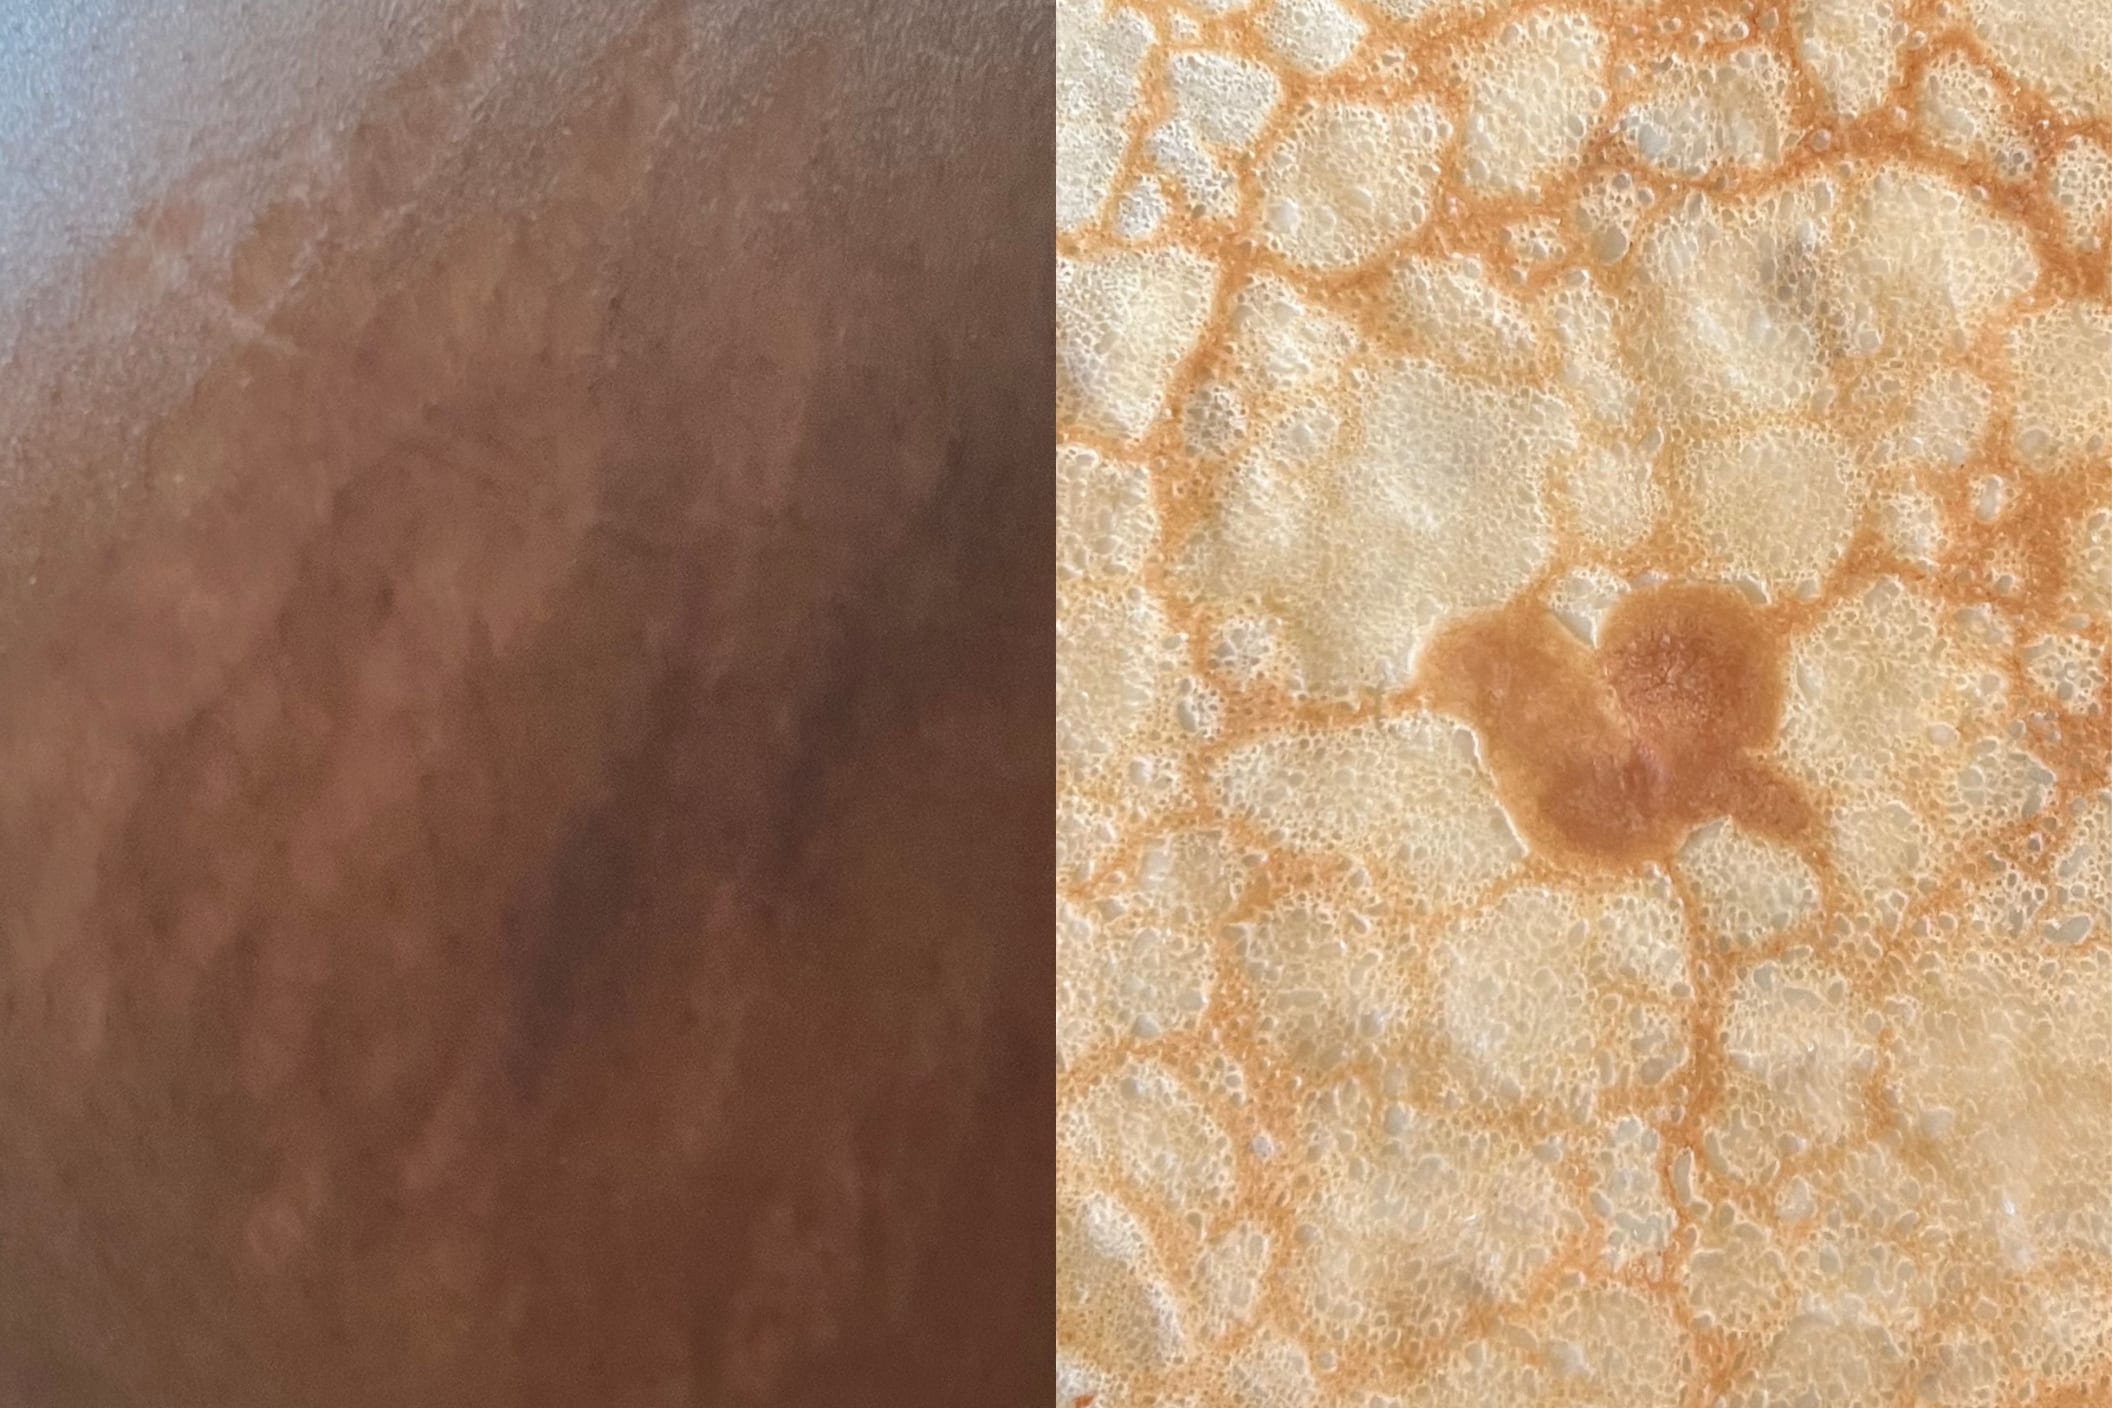 Image of stretch marks compared to a pancake